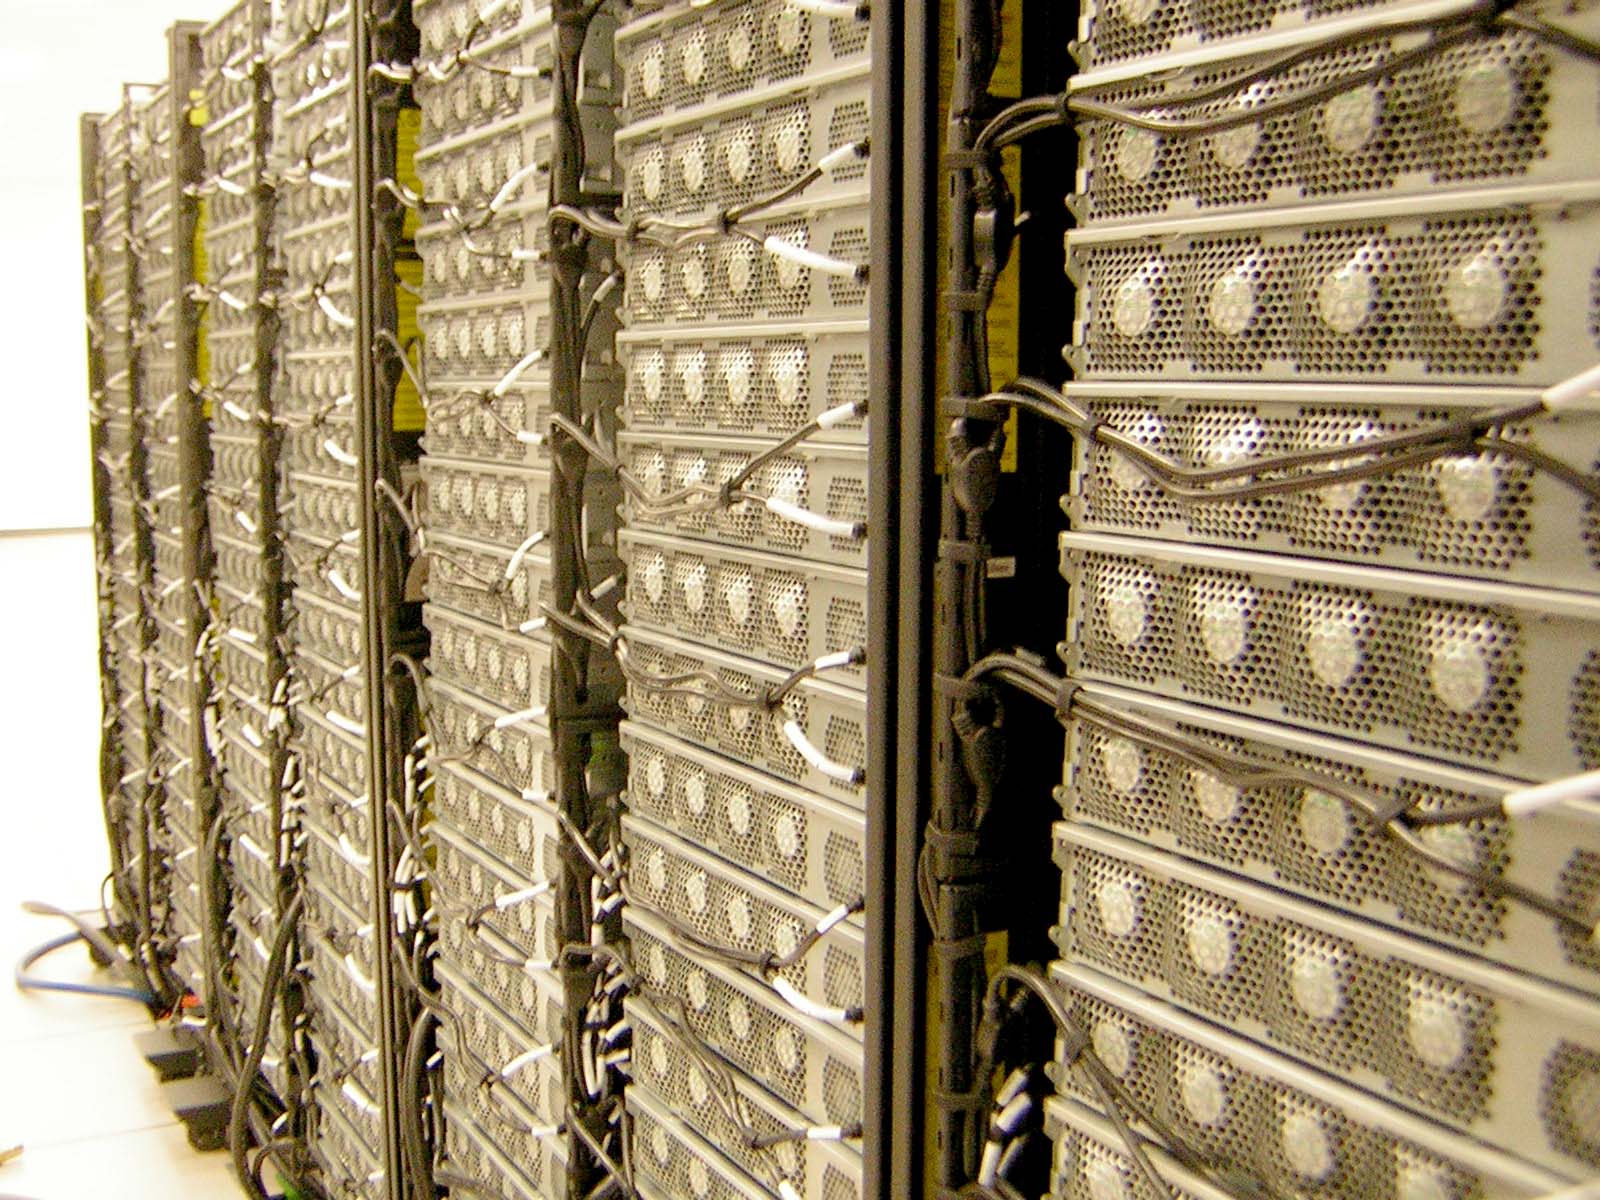 Back of compute racks showing cabling and fans. [Credit: SciNet]